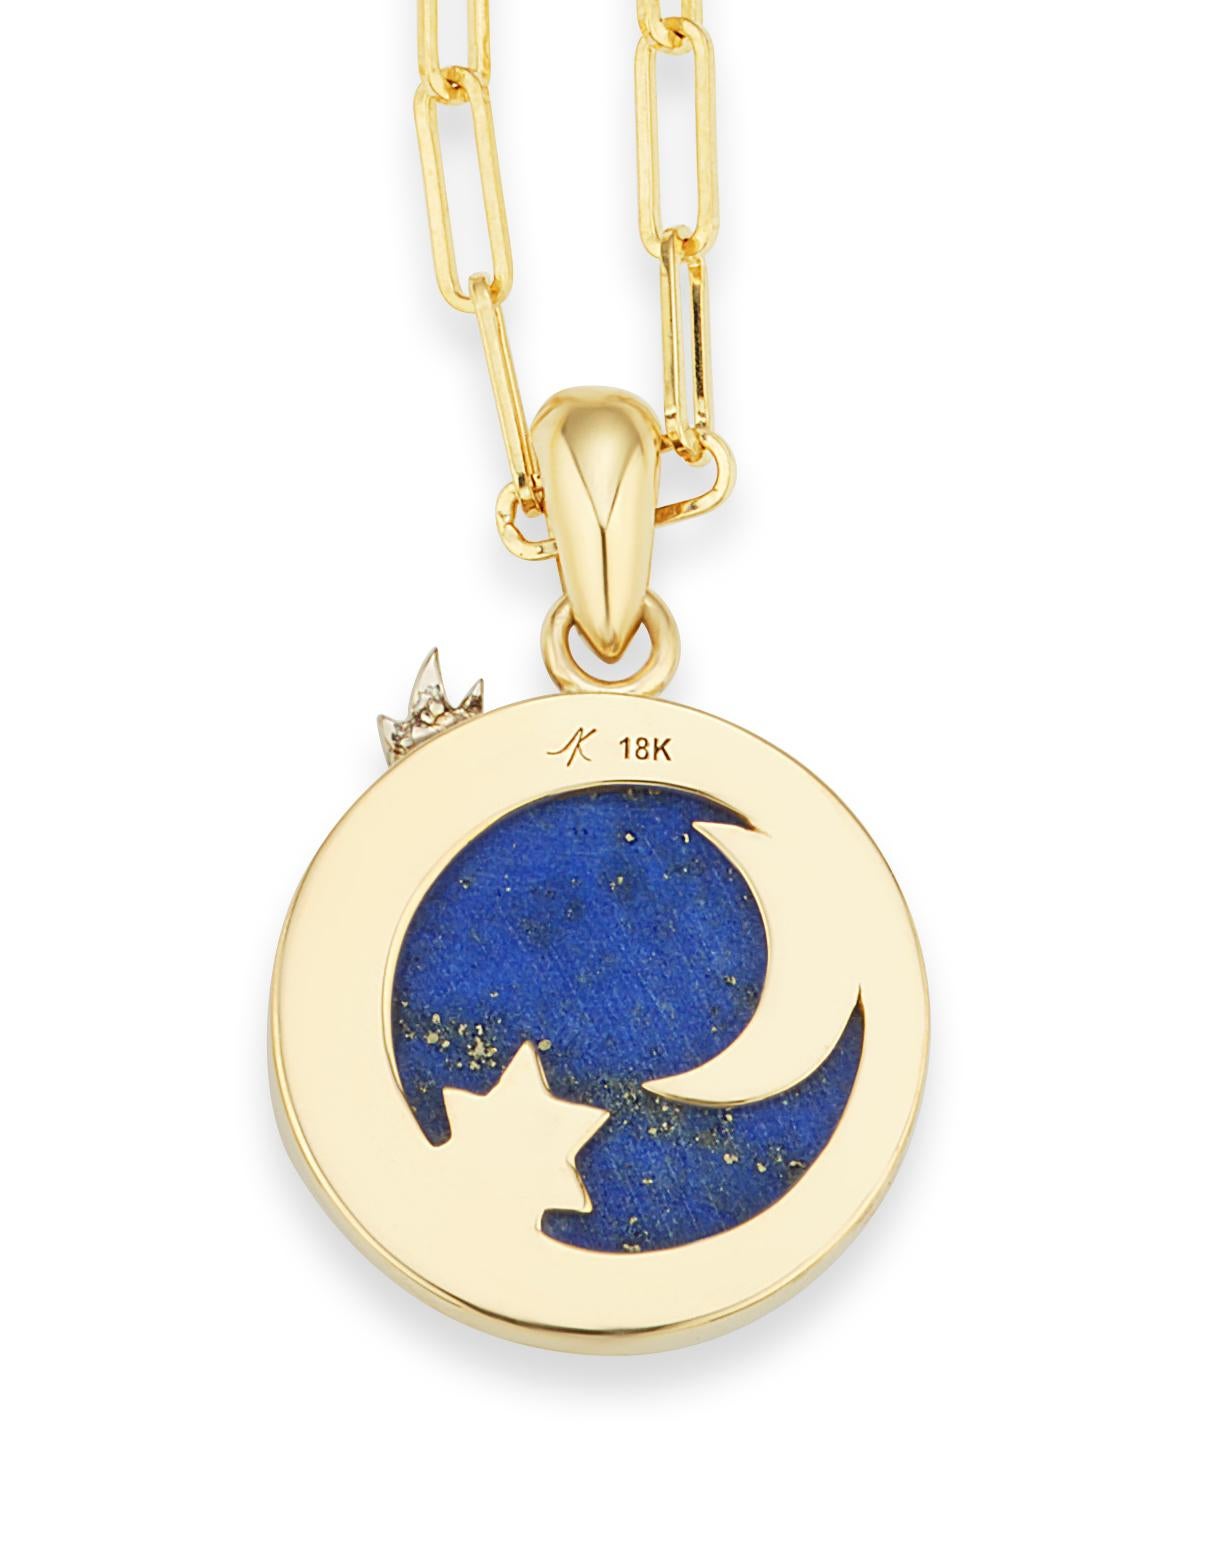 The Four Elements Air Pendant is a dazzling piece honoring both the visual and spiritual cosmos. A blue lapis lazuli ether is the background on which a luminous crescent moon and stars sparkle in yellow gold and pave diamonds. A radiant white gold